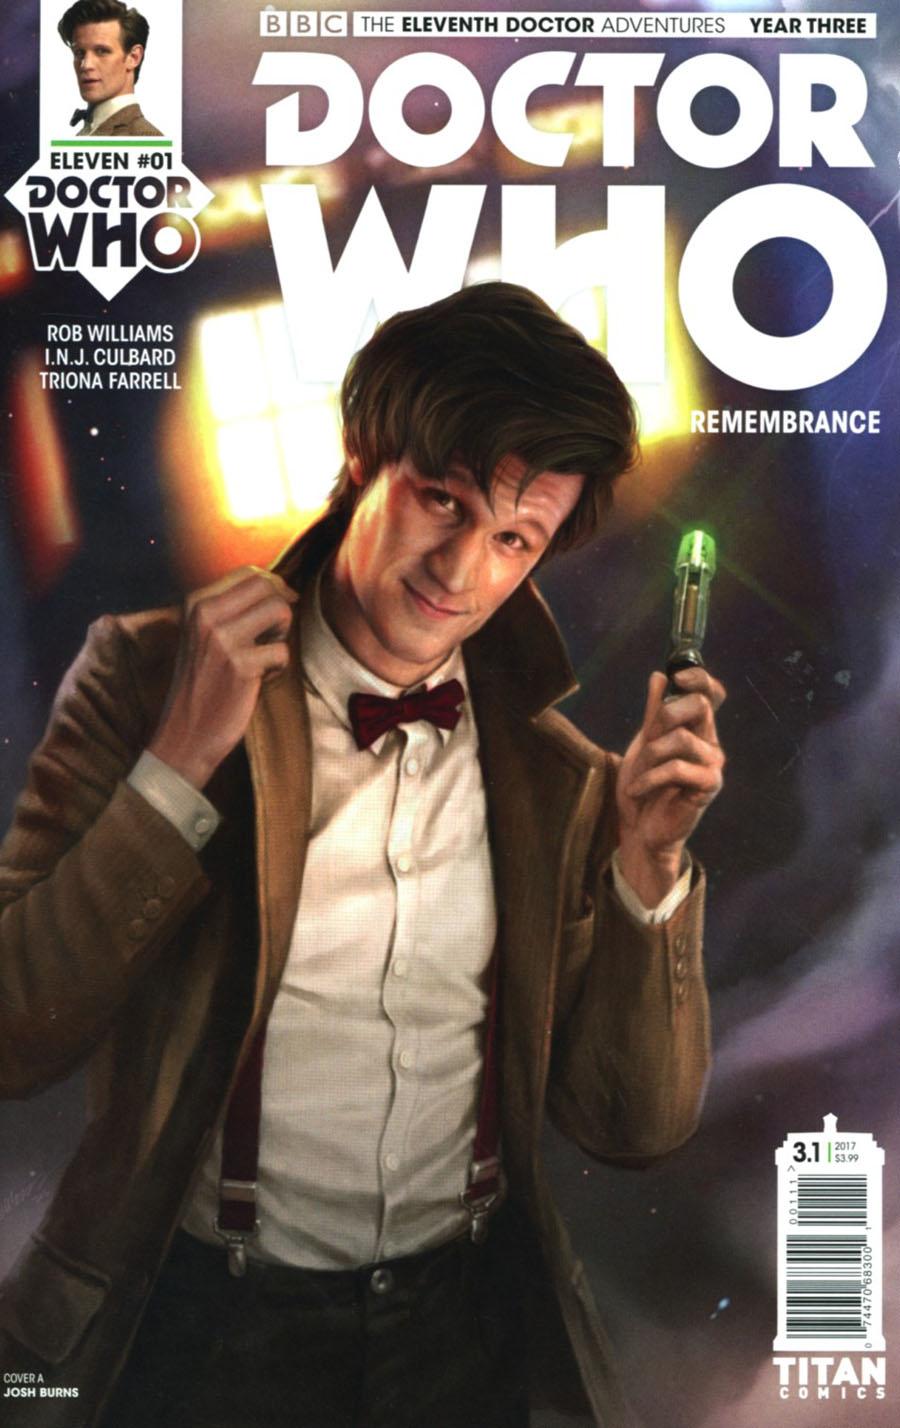 Doctor Who 11th Doctor Year Three Vol. 1 #1